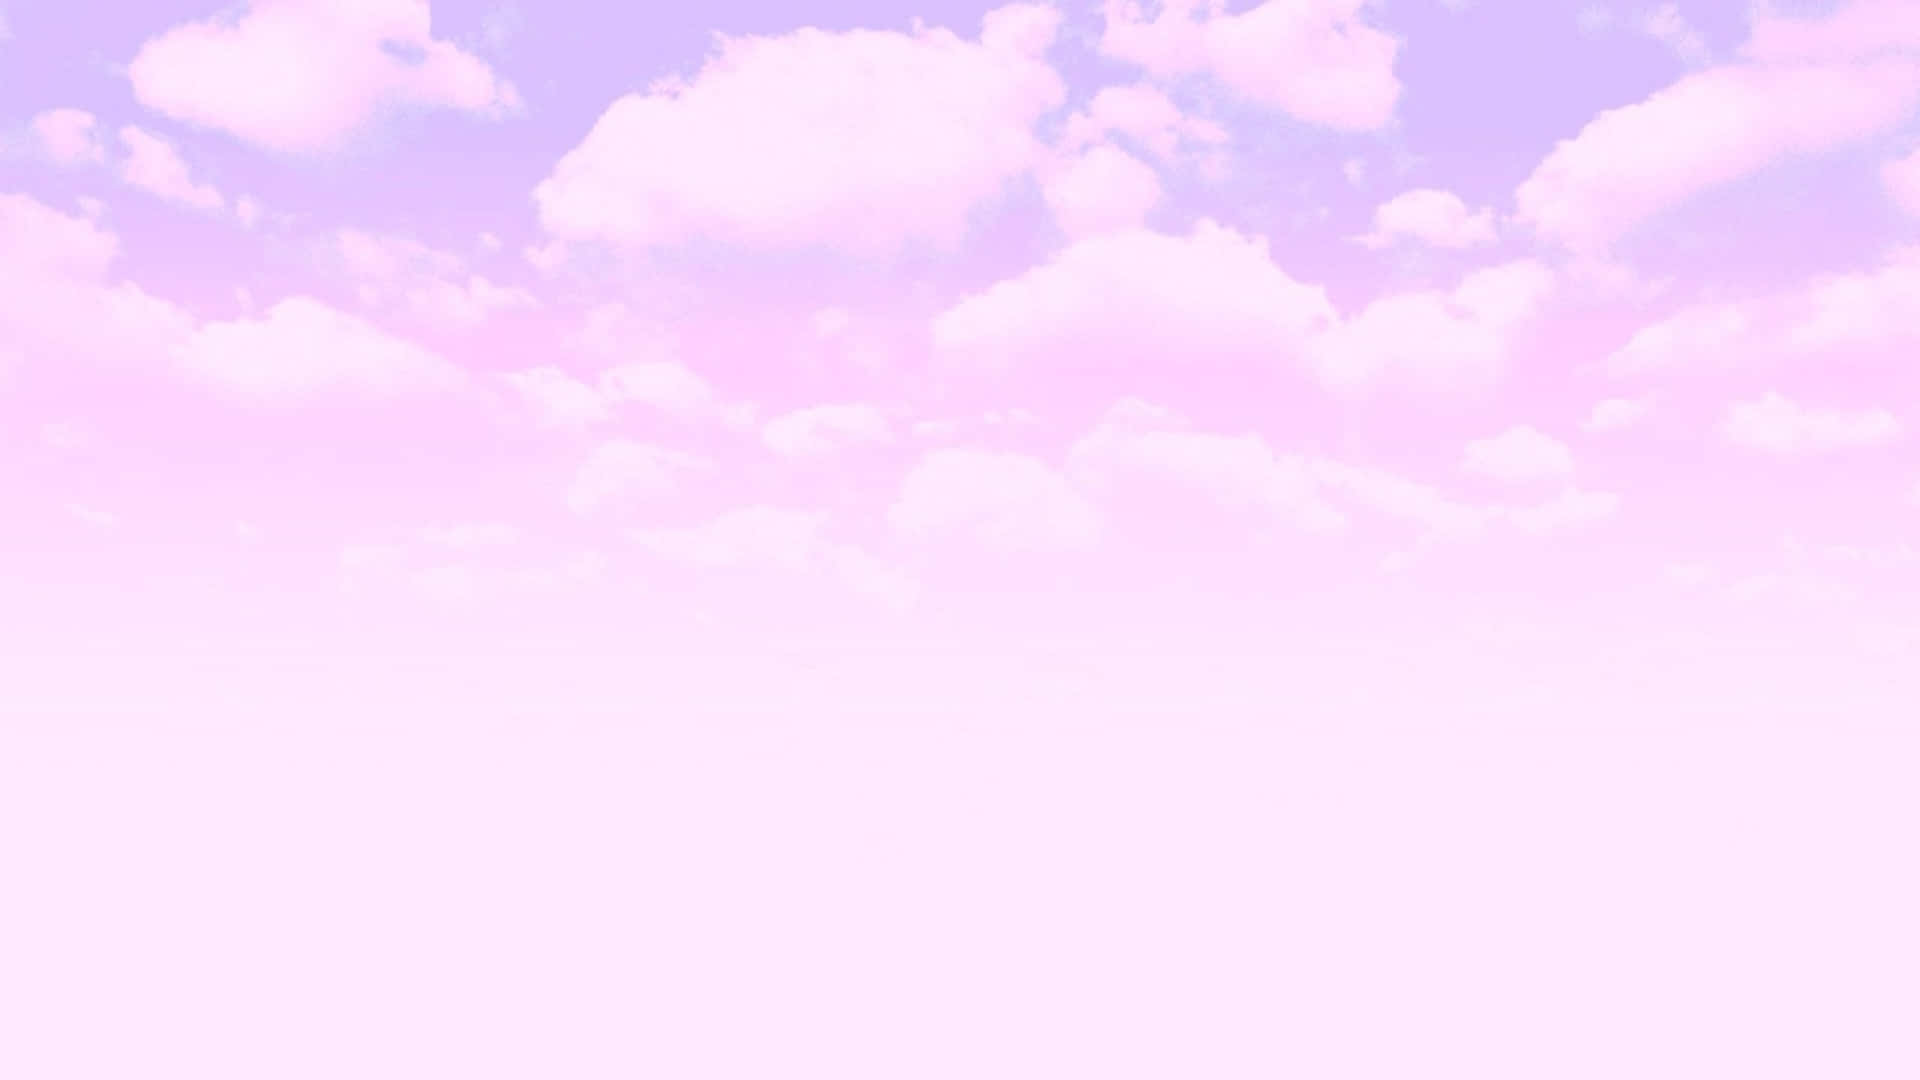 A Pink And Purple Sky With Clouds